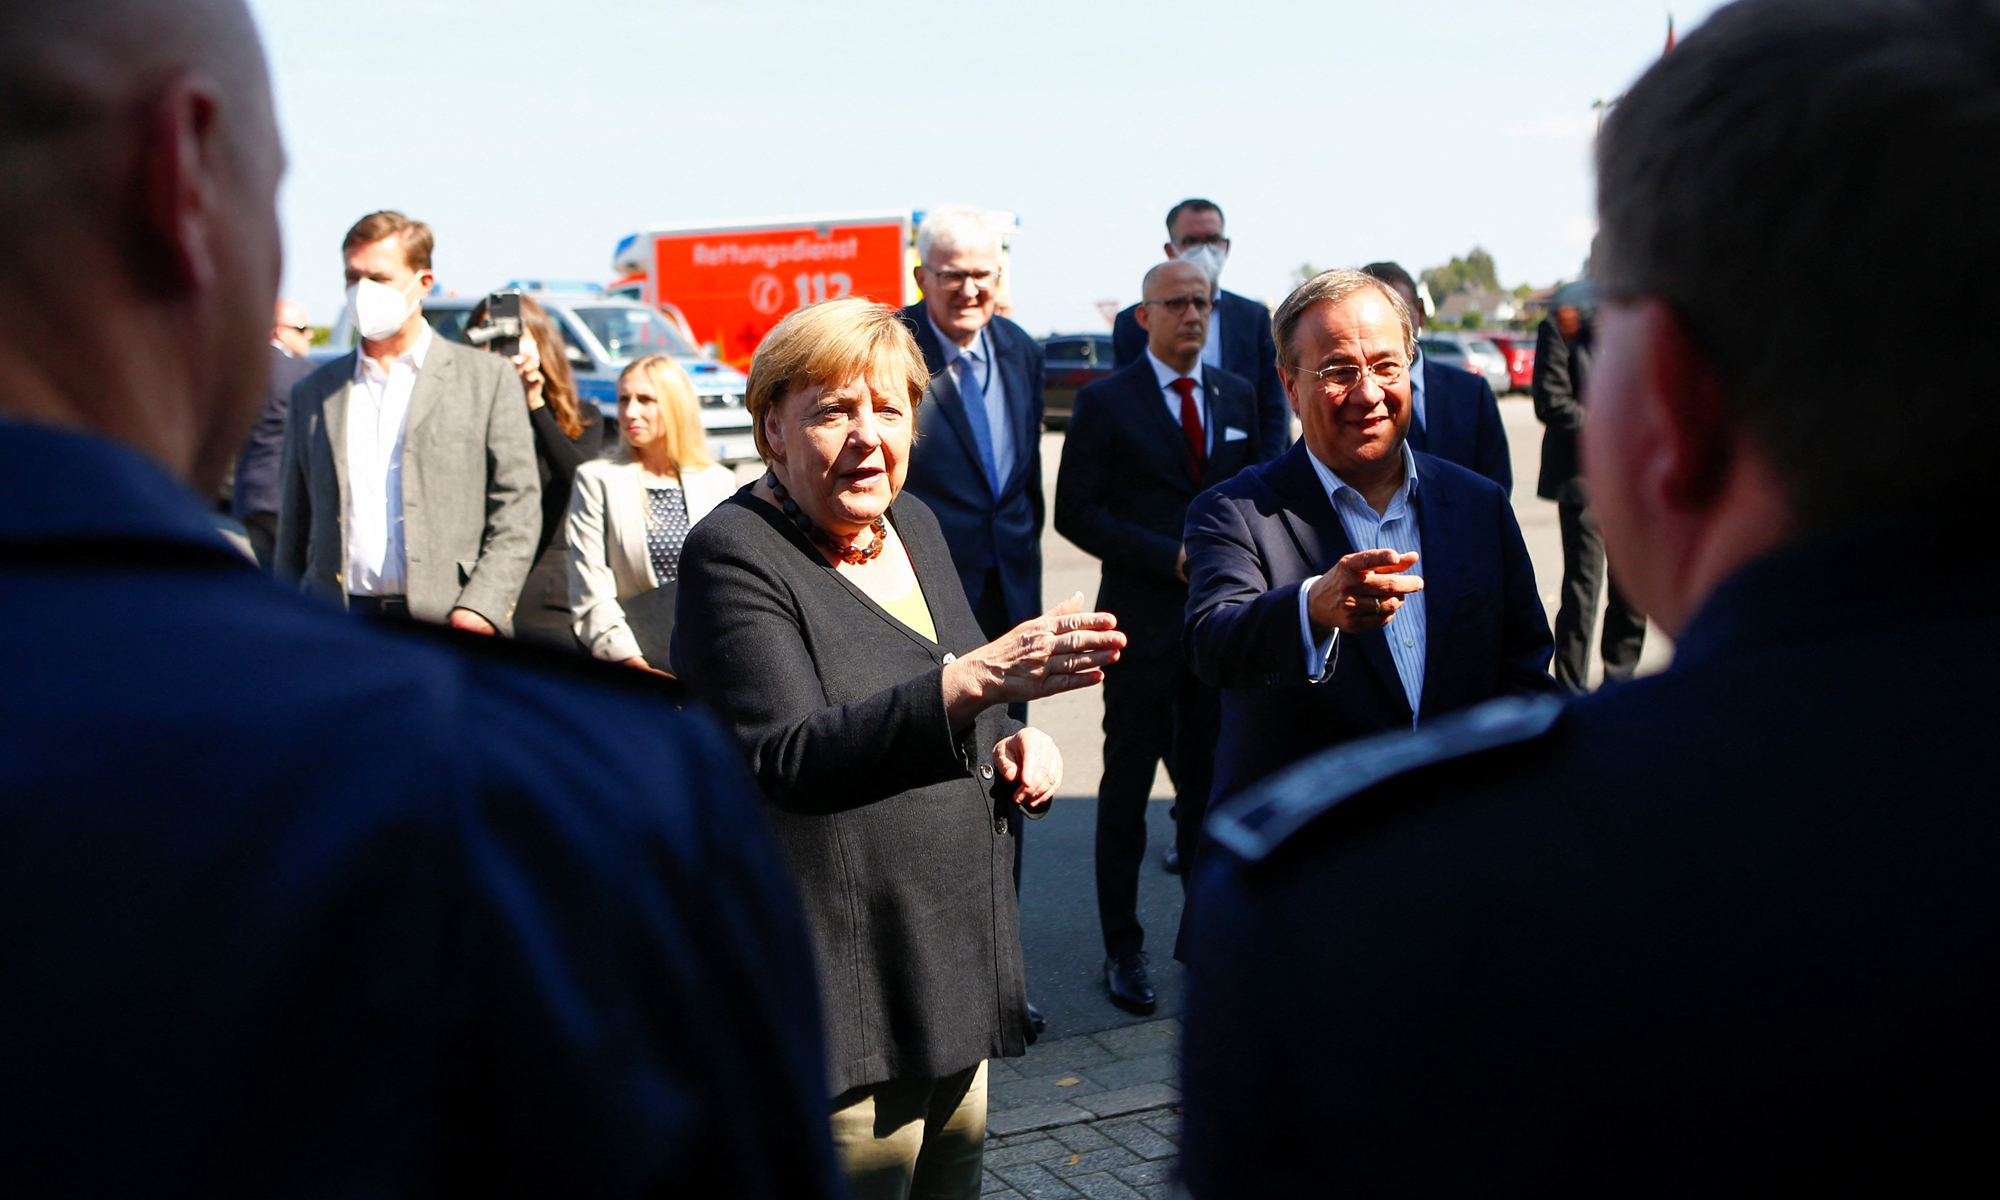 German Chancellor Angela Merkel (center) and North Rhine-Westphalia's State Premier and Germany's conservative Christian Democratic Union's chancellor candidate Armin Laschet (right) visit the fire station in Schalksmuehle, North Rhine-Westphalia, western Germany on Sunday, during a tour in the flood-hit region. Since mid July, the floods have caused about 180 deaths in this area. Photo: AFP